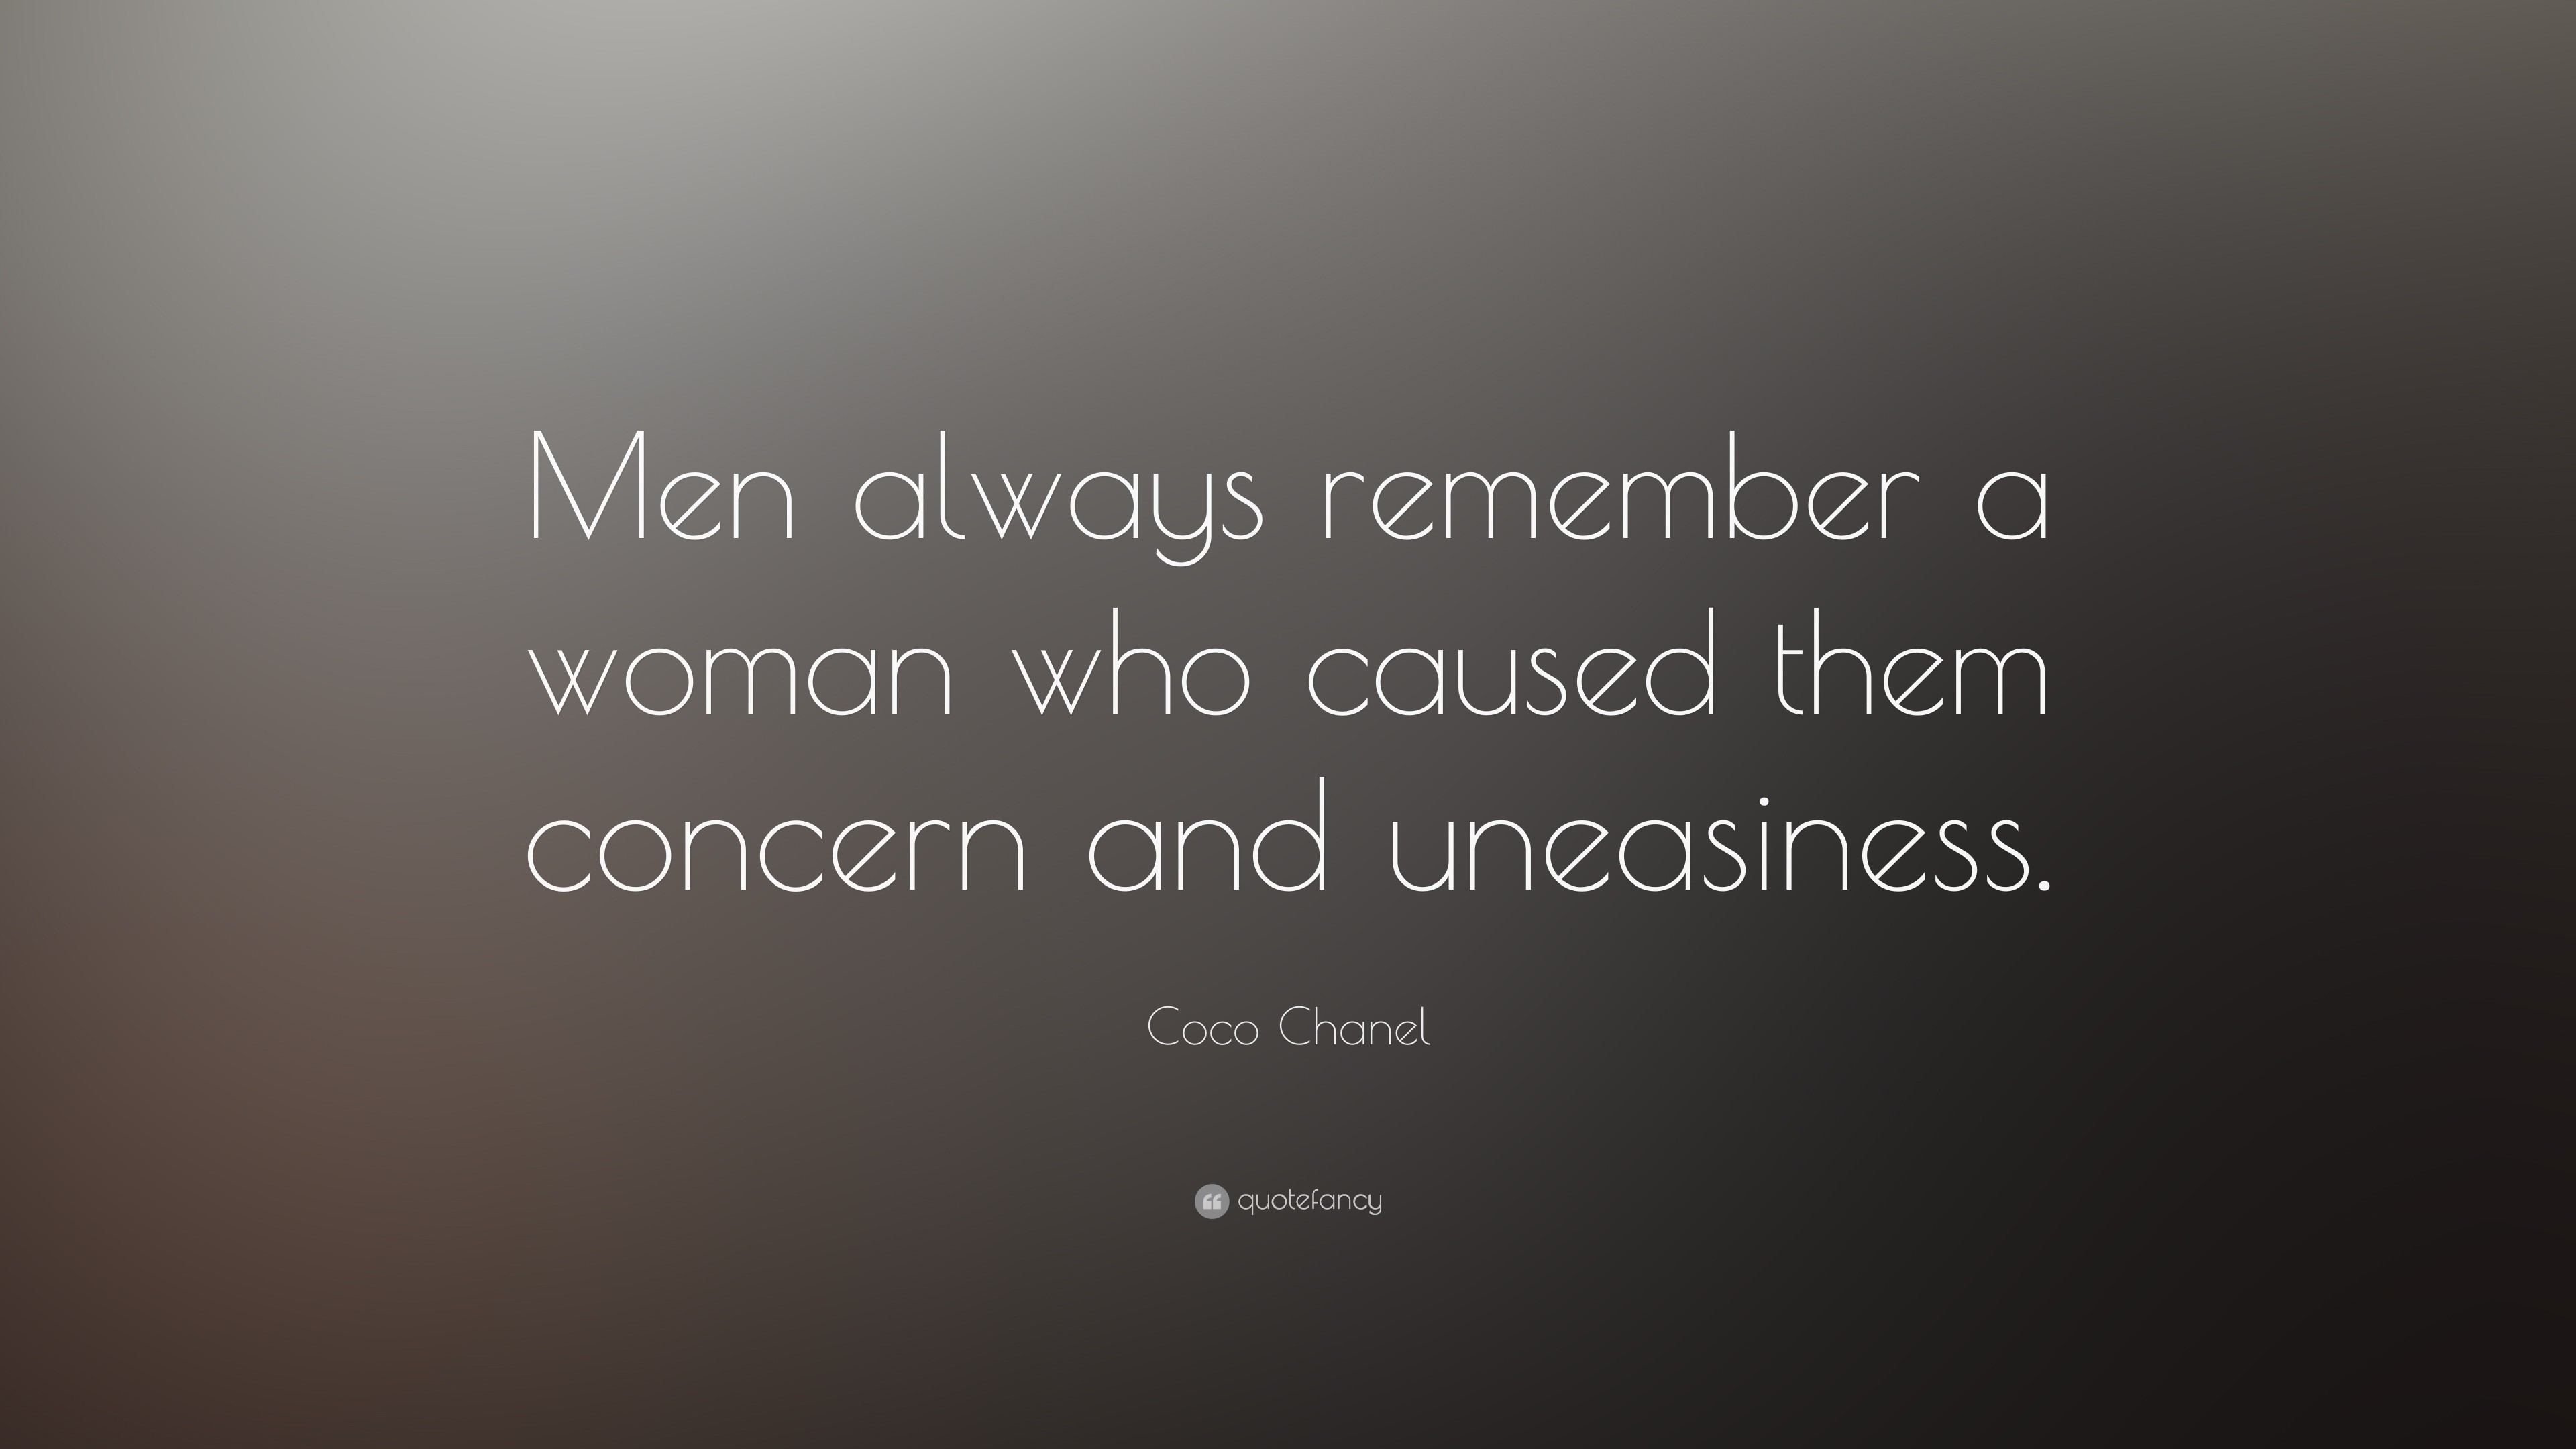 3840x2160 Coco Chanel Quote: “Men always remember a woman who caused them concern and  uneasiness